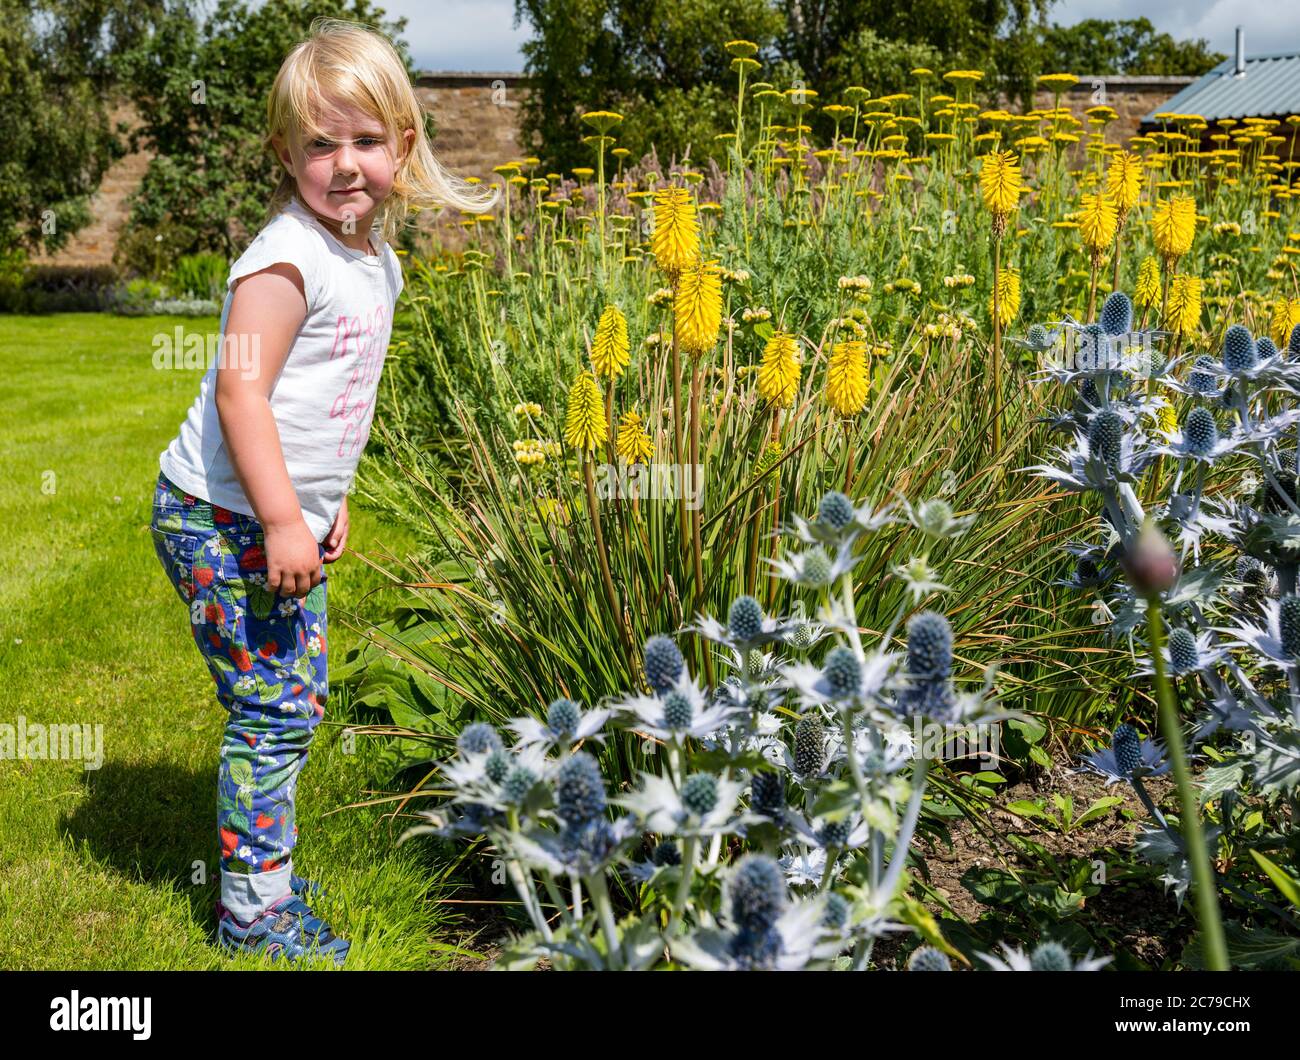 Haddington, East Lothian, Scotland, UK, 15th July 2020. Amisfield Walled Garden reopens: 18th century garden, one of the largest in Scotland.  It is now open 3 days a week with an online booking system after lockdown restrictions eased during the Covid-19 pandemic. Joni, aged 3 years, enjoys the colourful flowers, including red hot poker plants or lemon torch lilies (tritoma) and sea holly (Eryngium) in the Summer sunshine Stock Photo